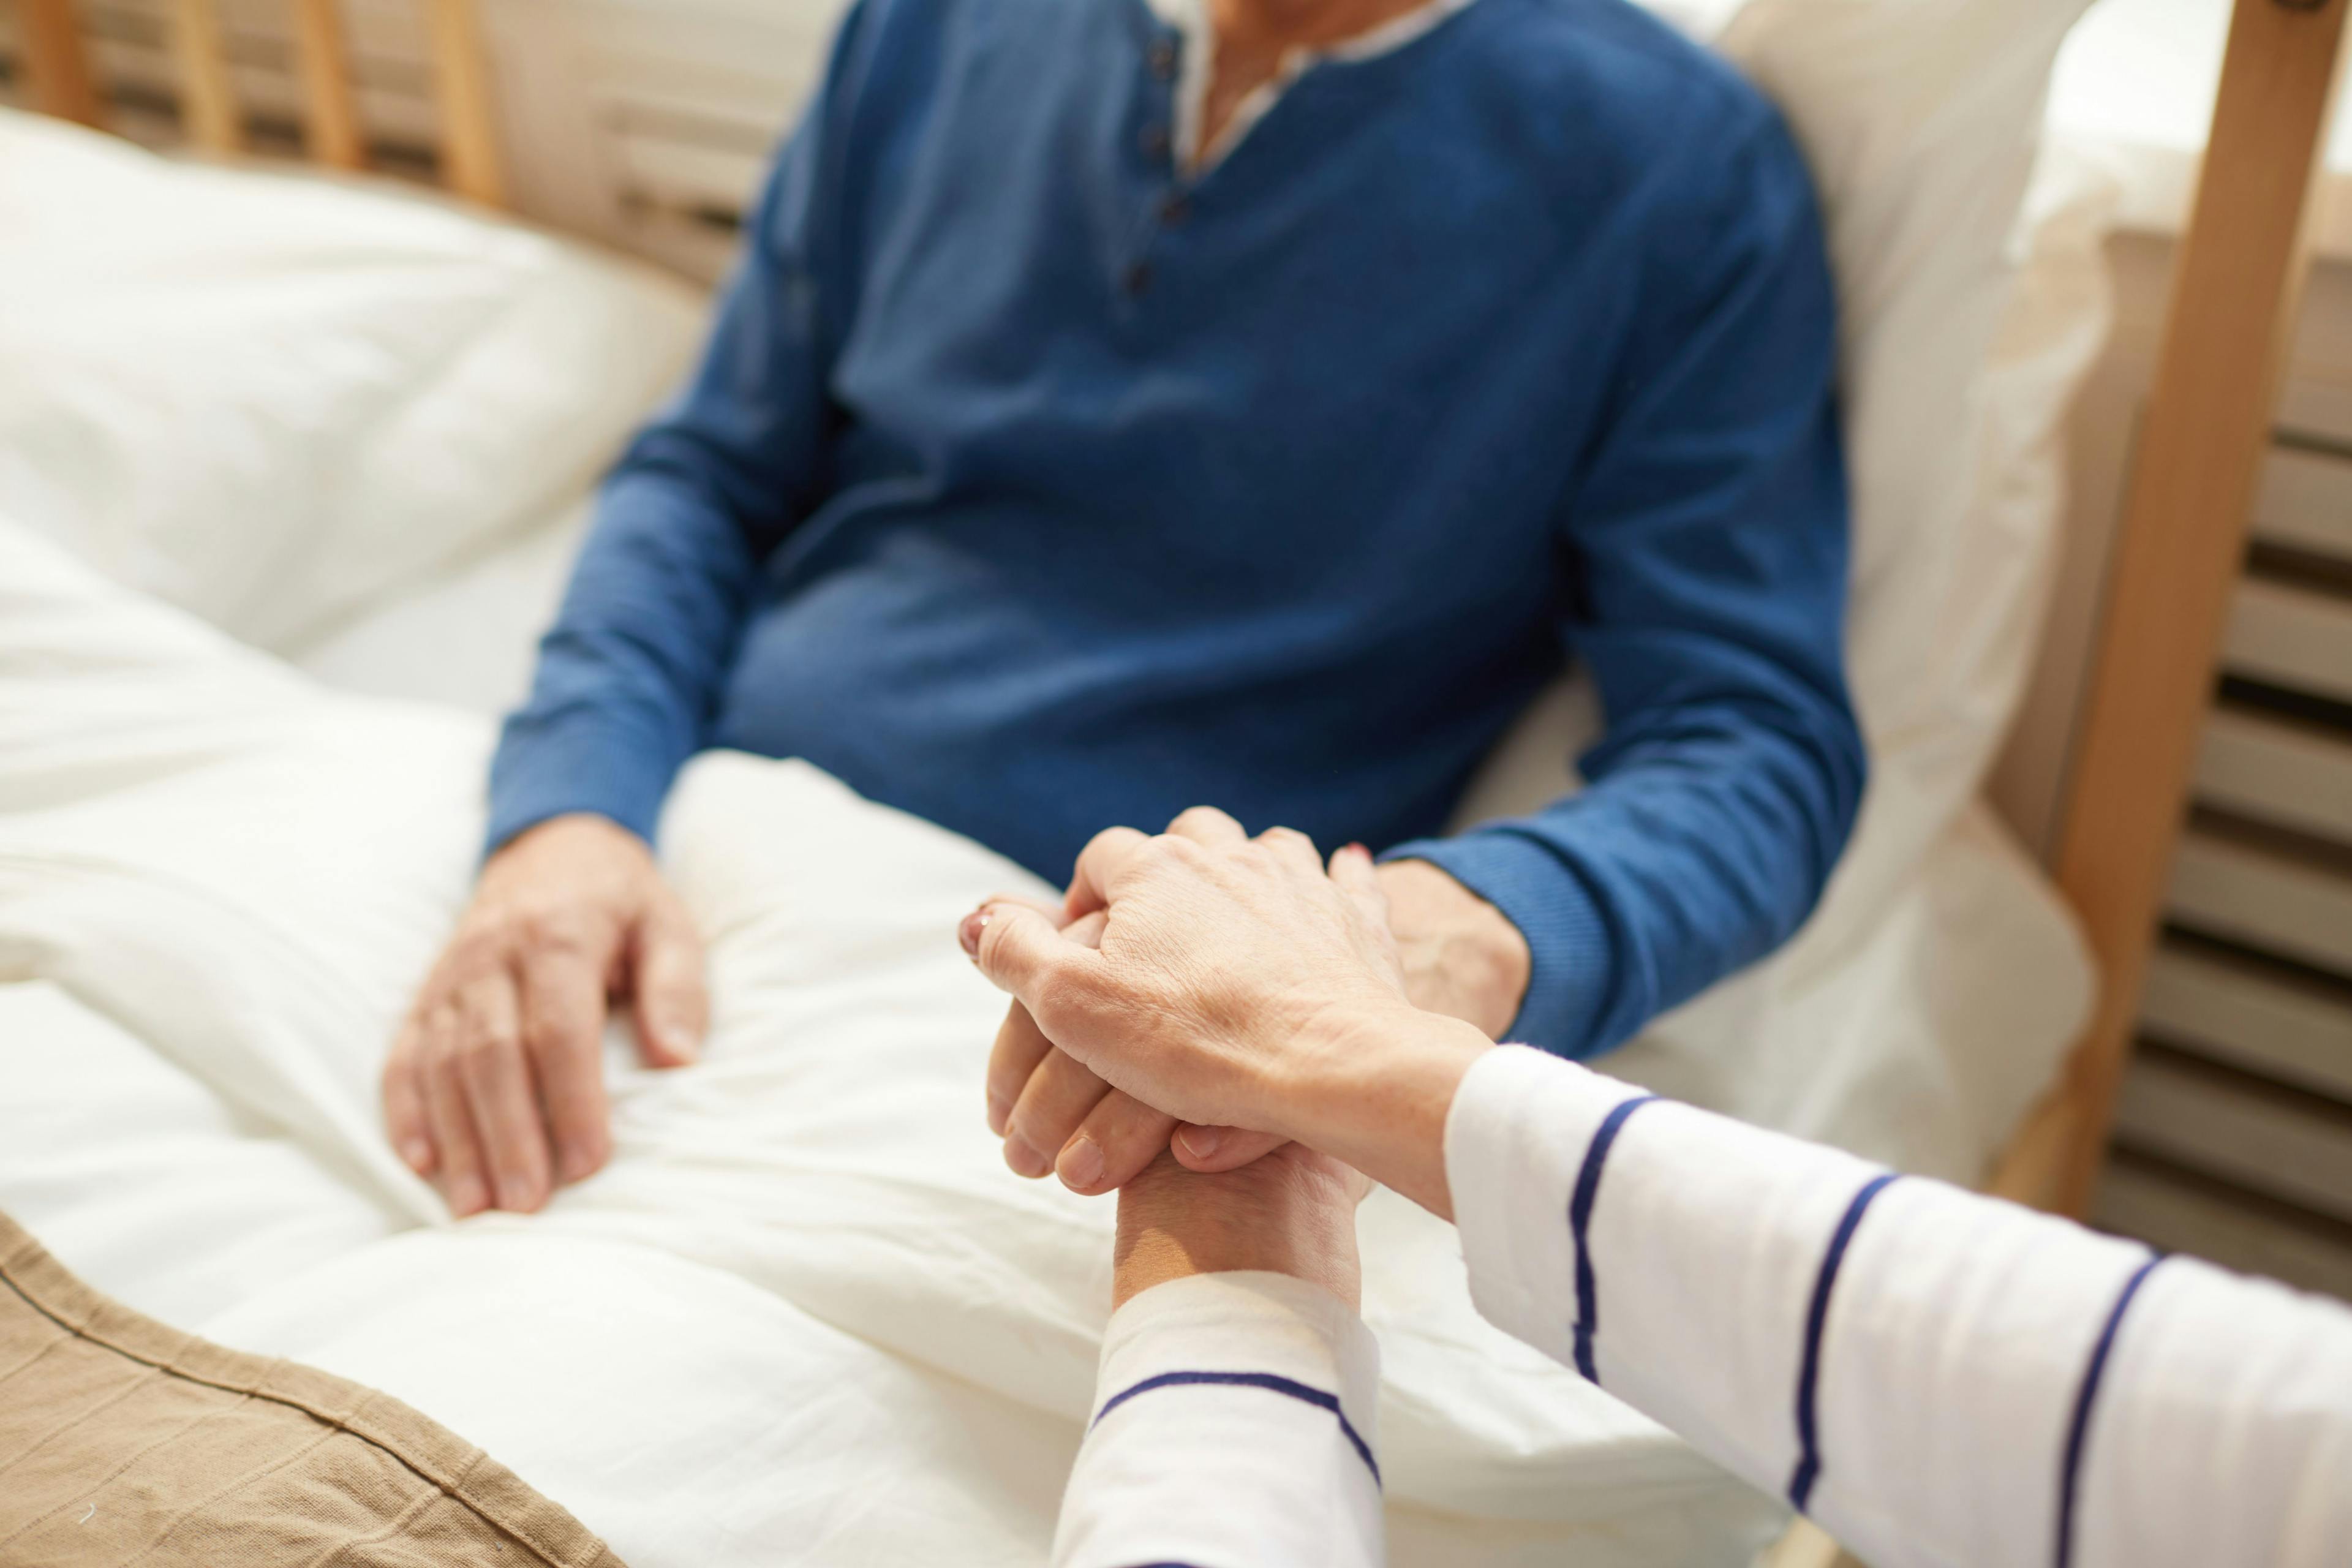 Seniors are getting more help at home after hospitalization, but what are the costs?